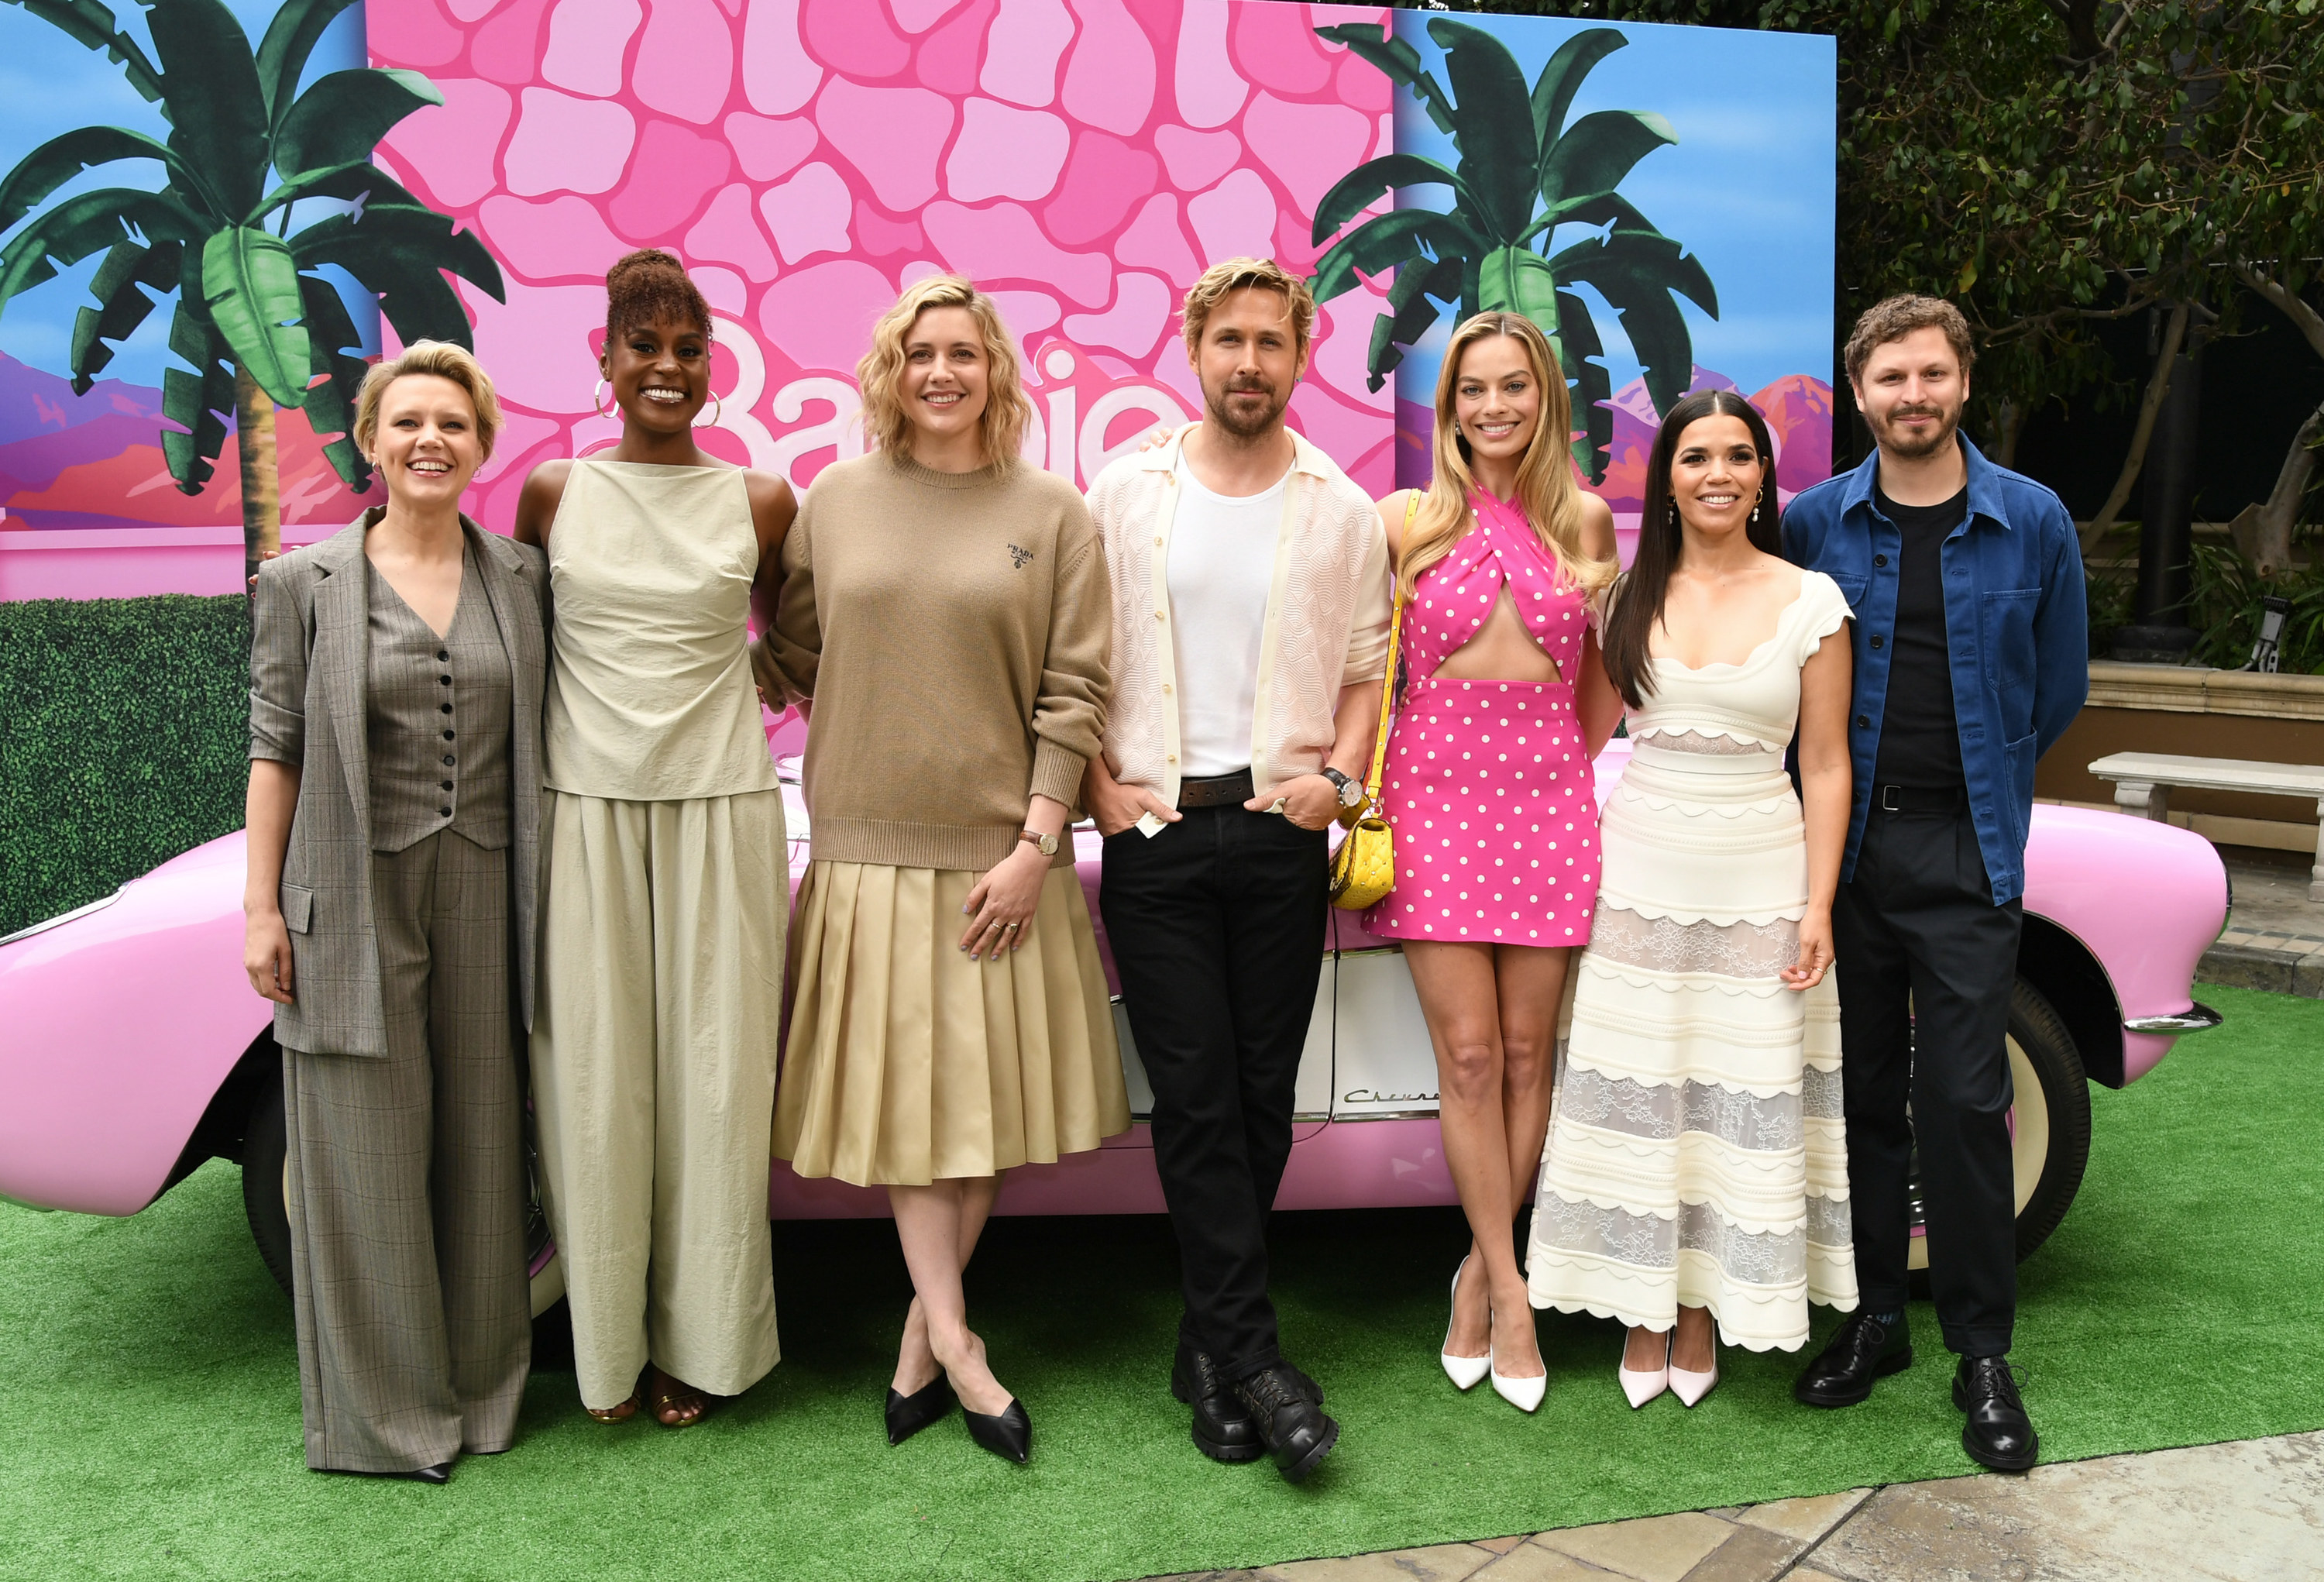 From left to right: Kate McKinnon, Issa Rae, Greta Gerwig, Ryan Gosling, Margot Robbie, America Ferrera, and Micahel Cera pose for a group photo in front of a pink convertible